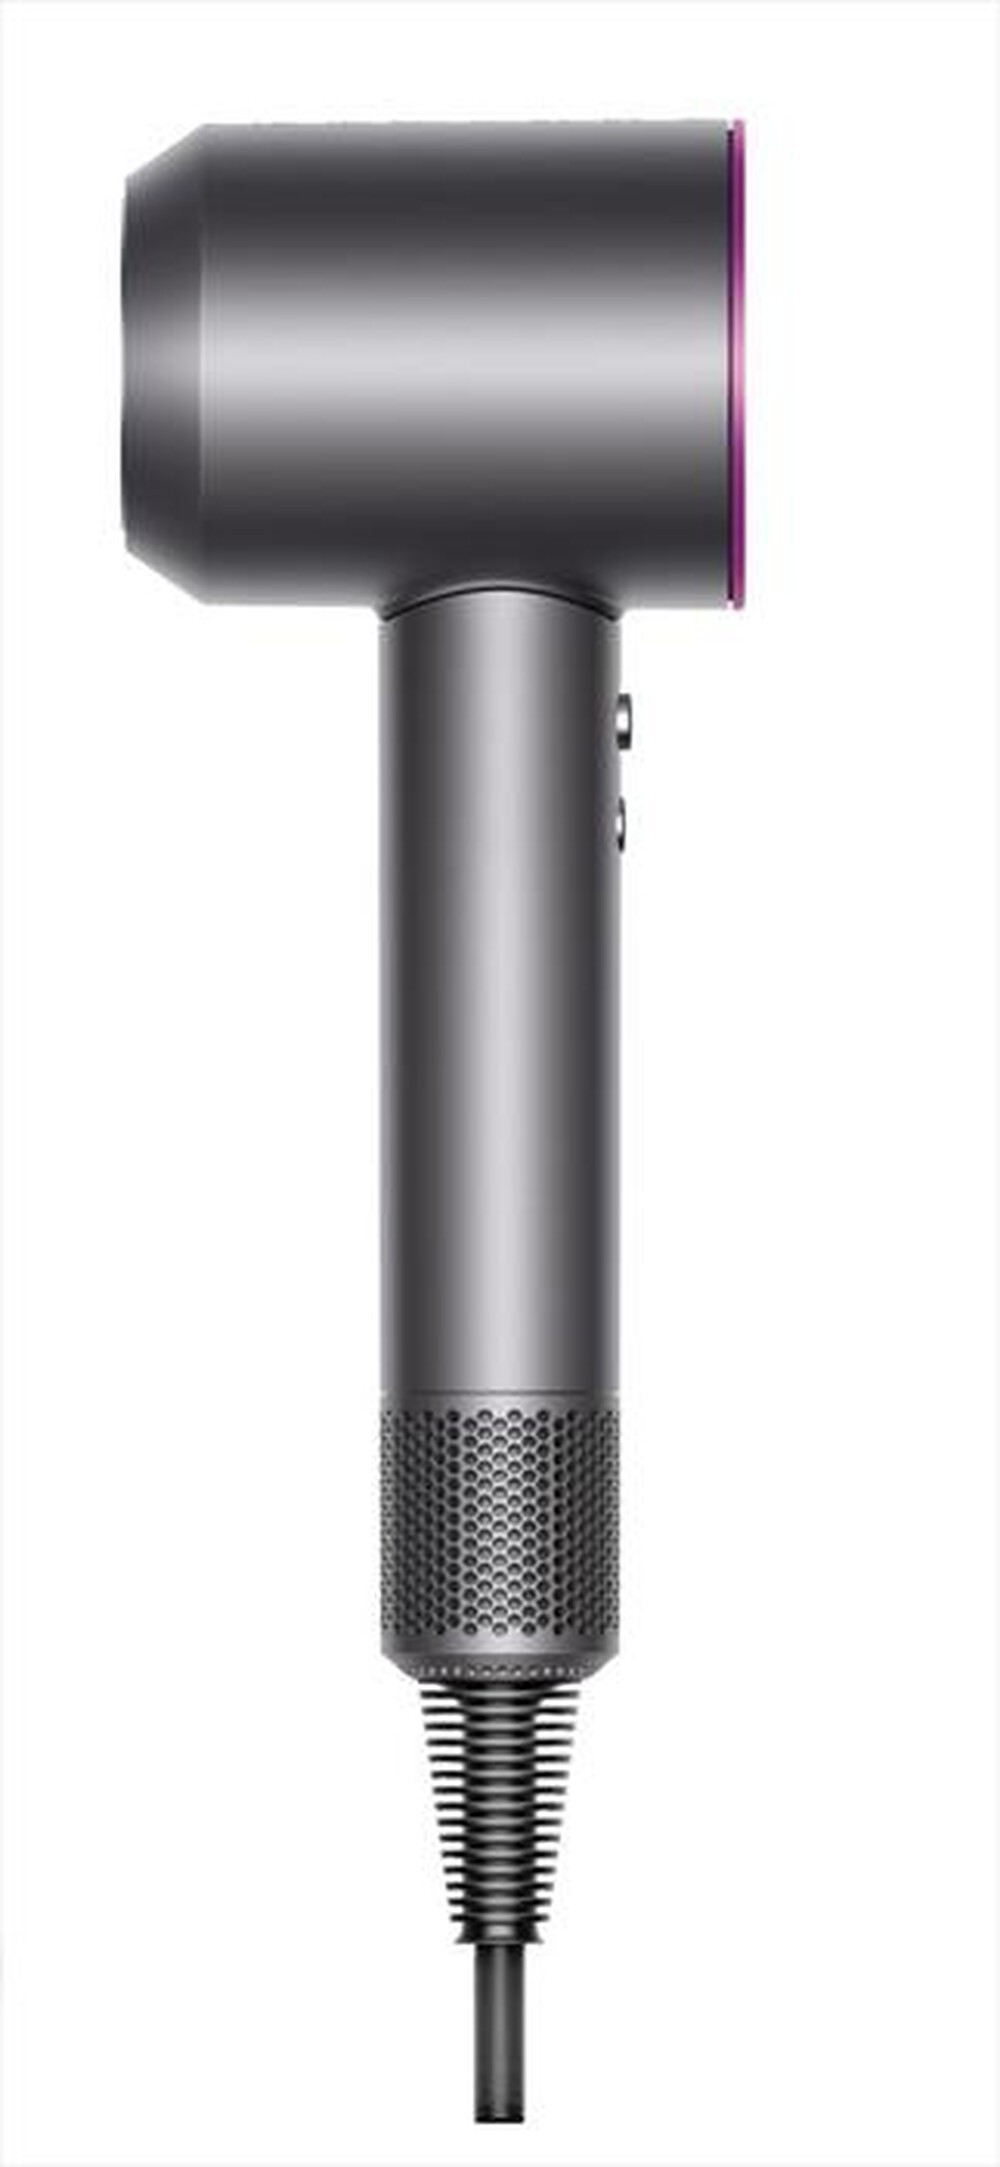 "DYSON - SUPERSONIC GENTLE AIR - "